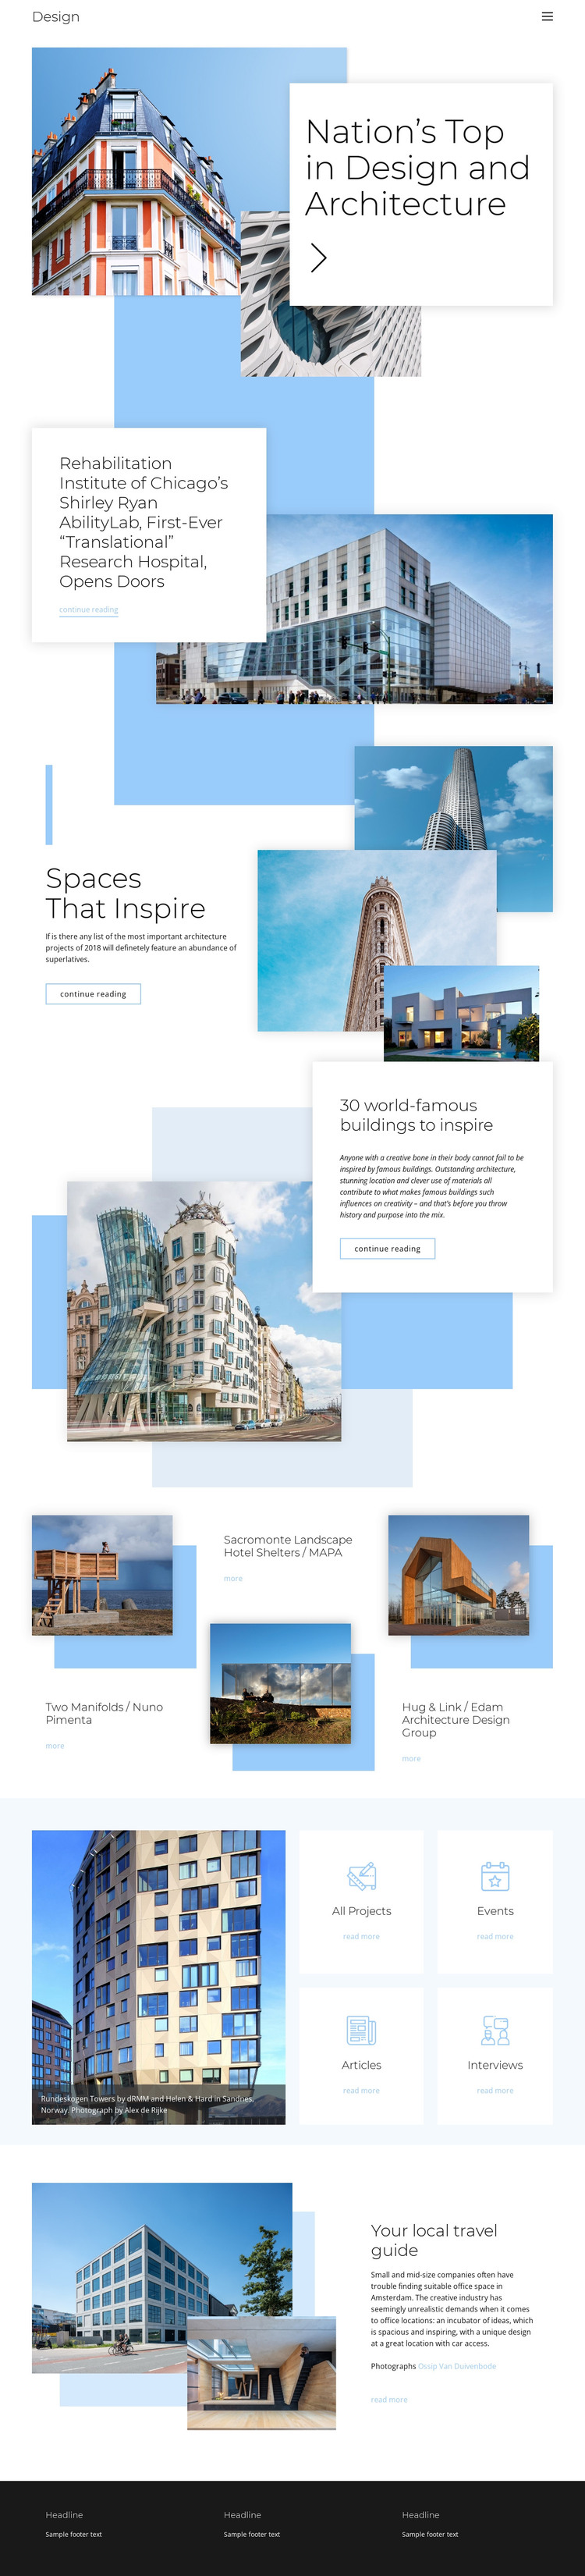 Rating for architecture Web Design